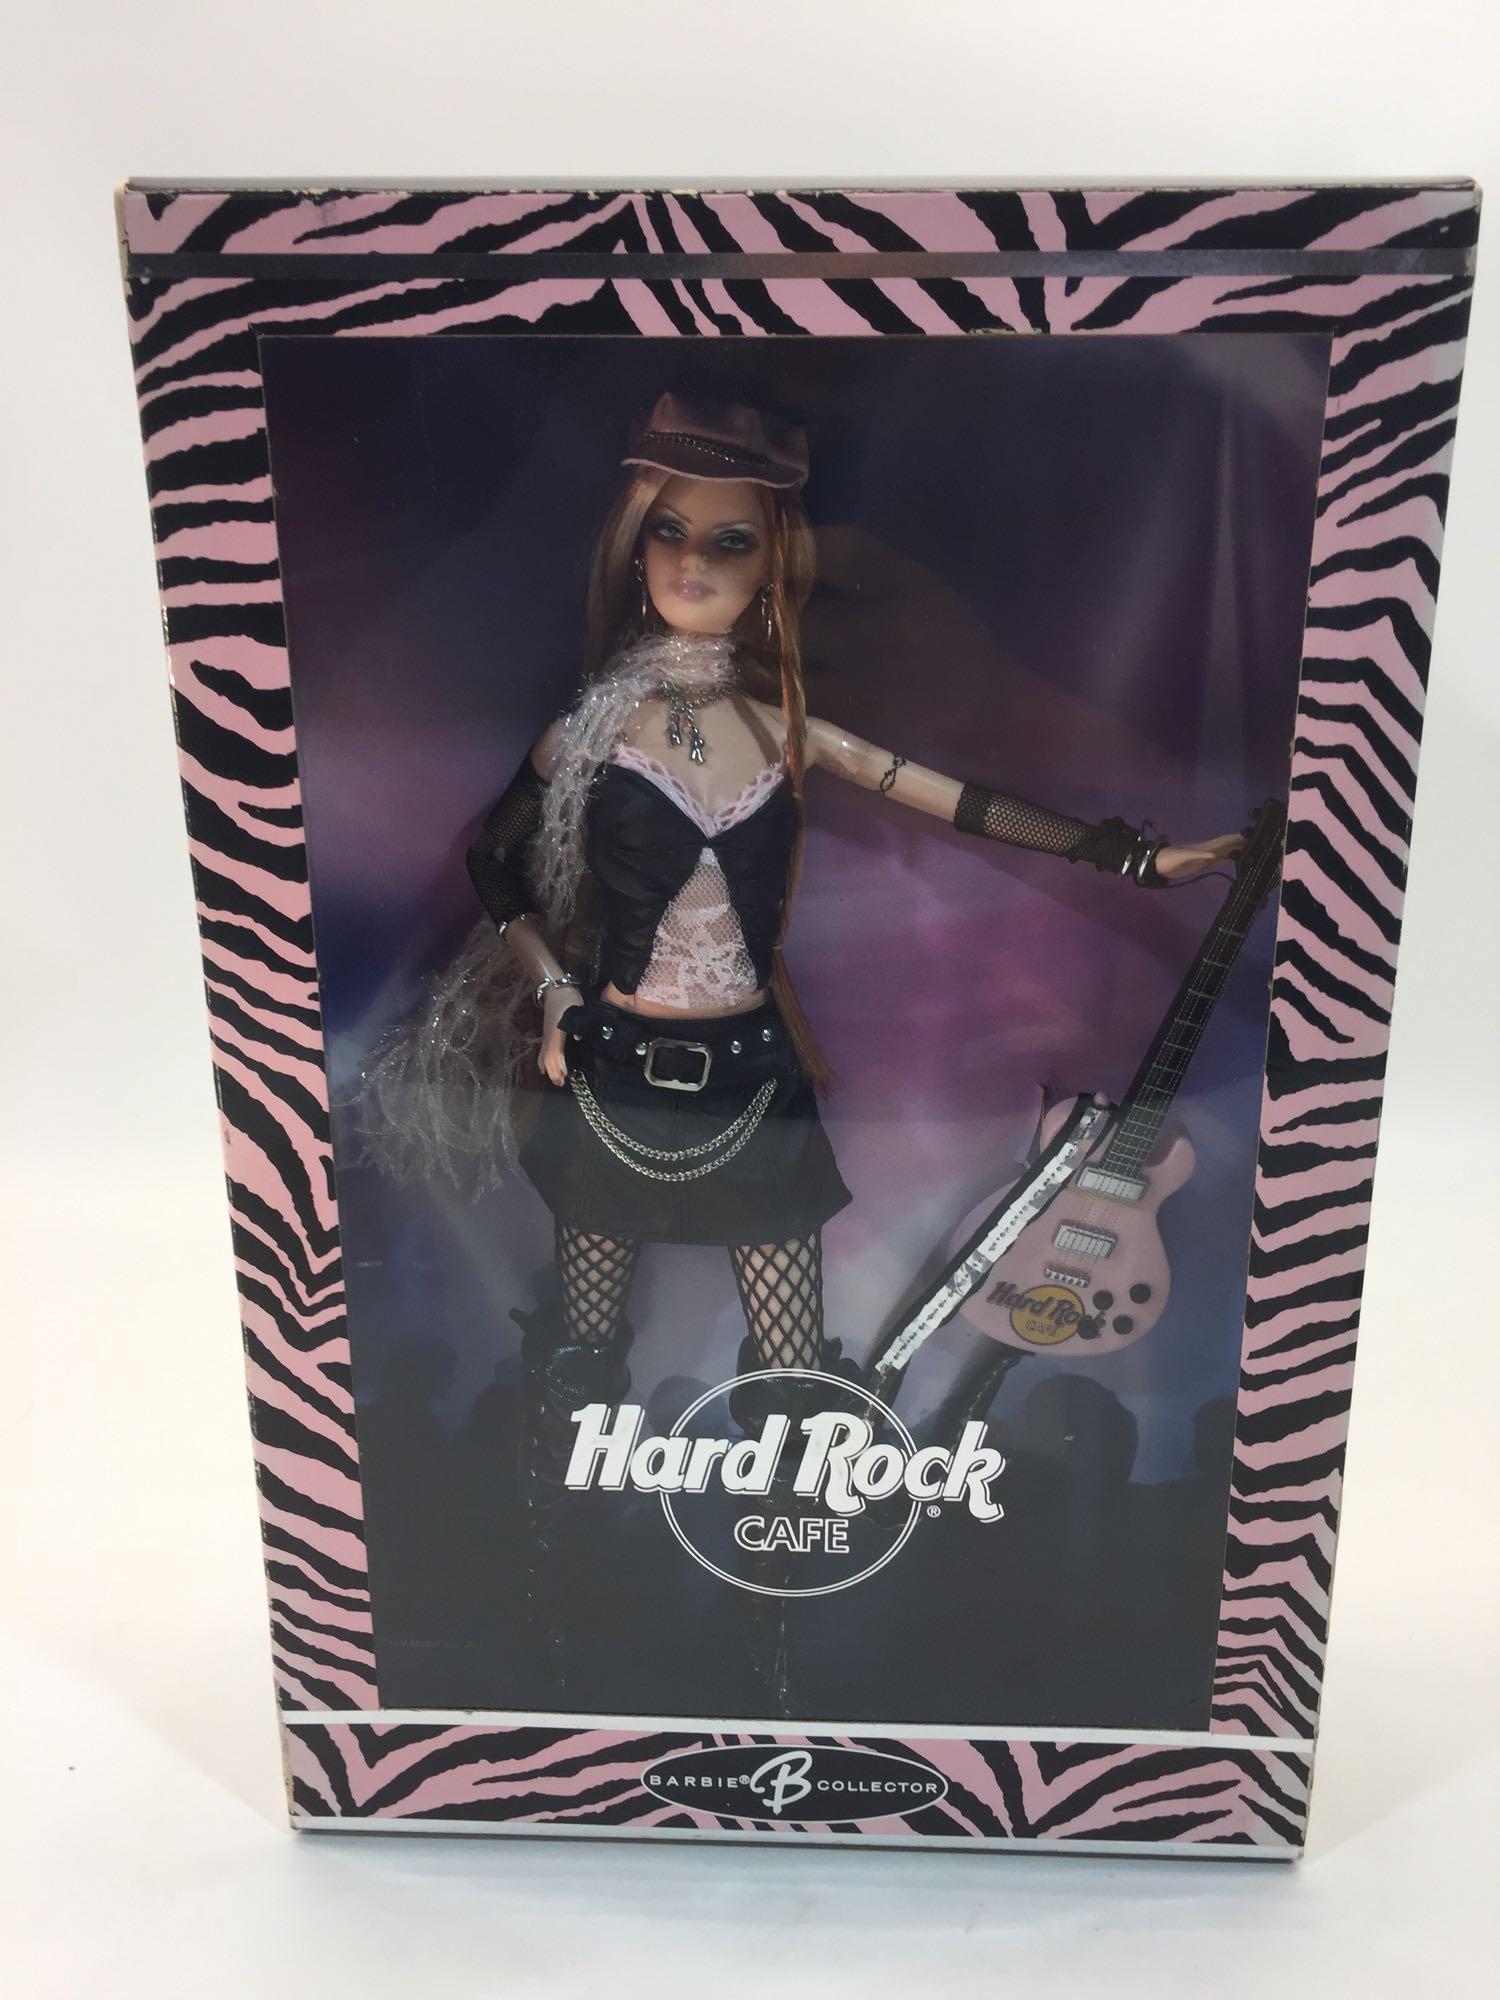 2004 Barbie Collector Hard Rock Barbie Doll with Guitar in Original Box 14in tall